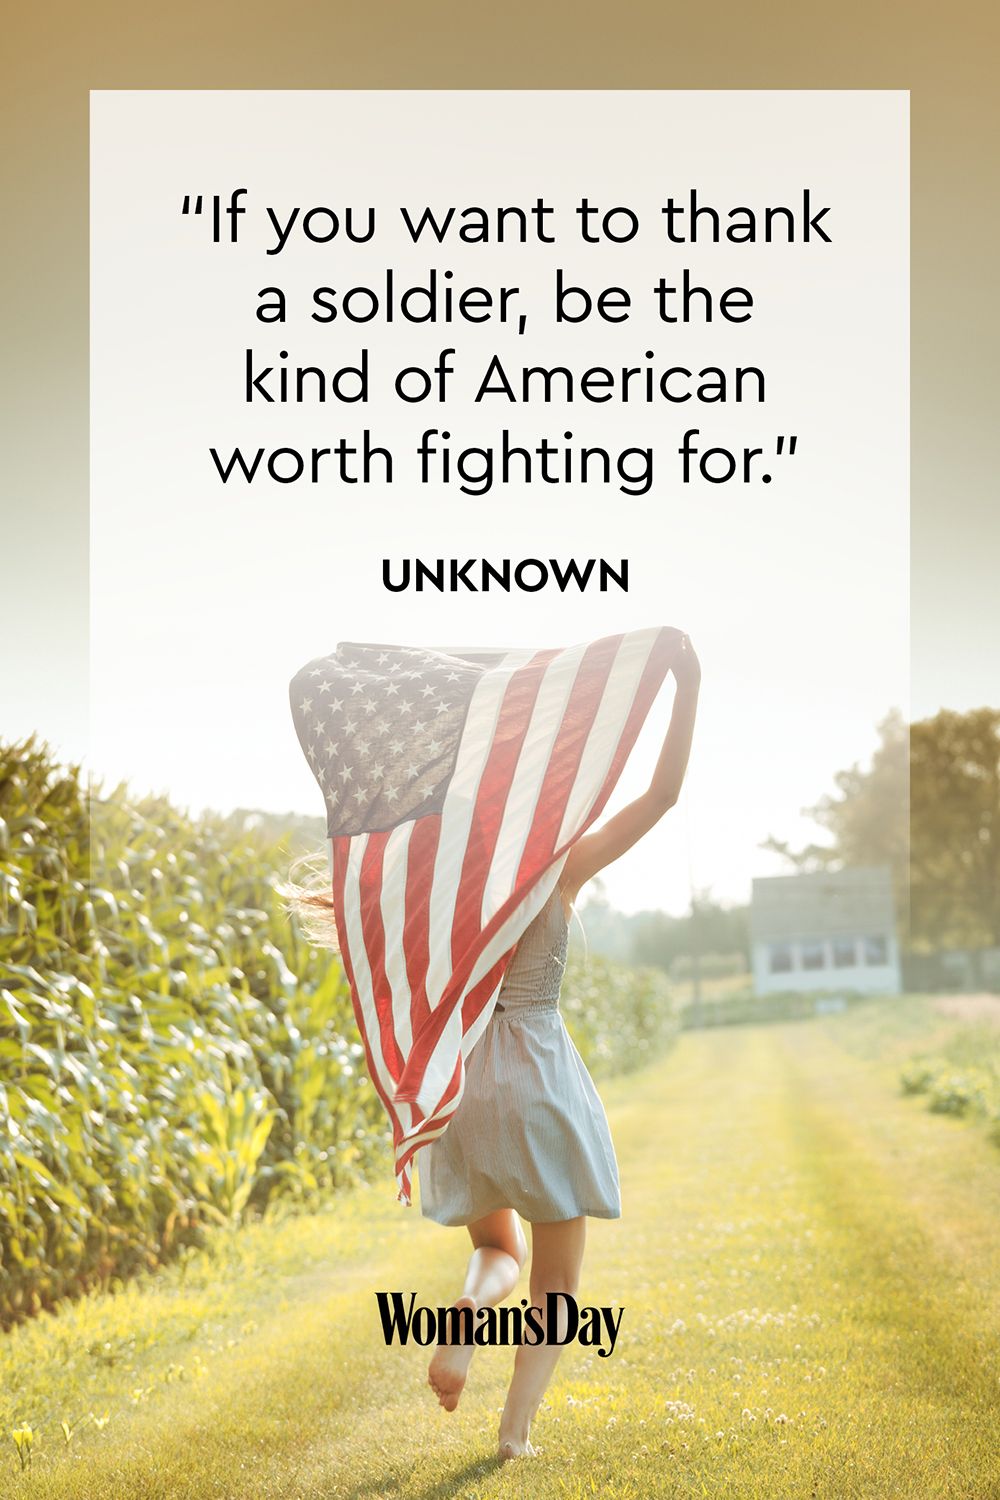 if you want to thank a soldier be the kind of american worth fighting for.